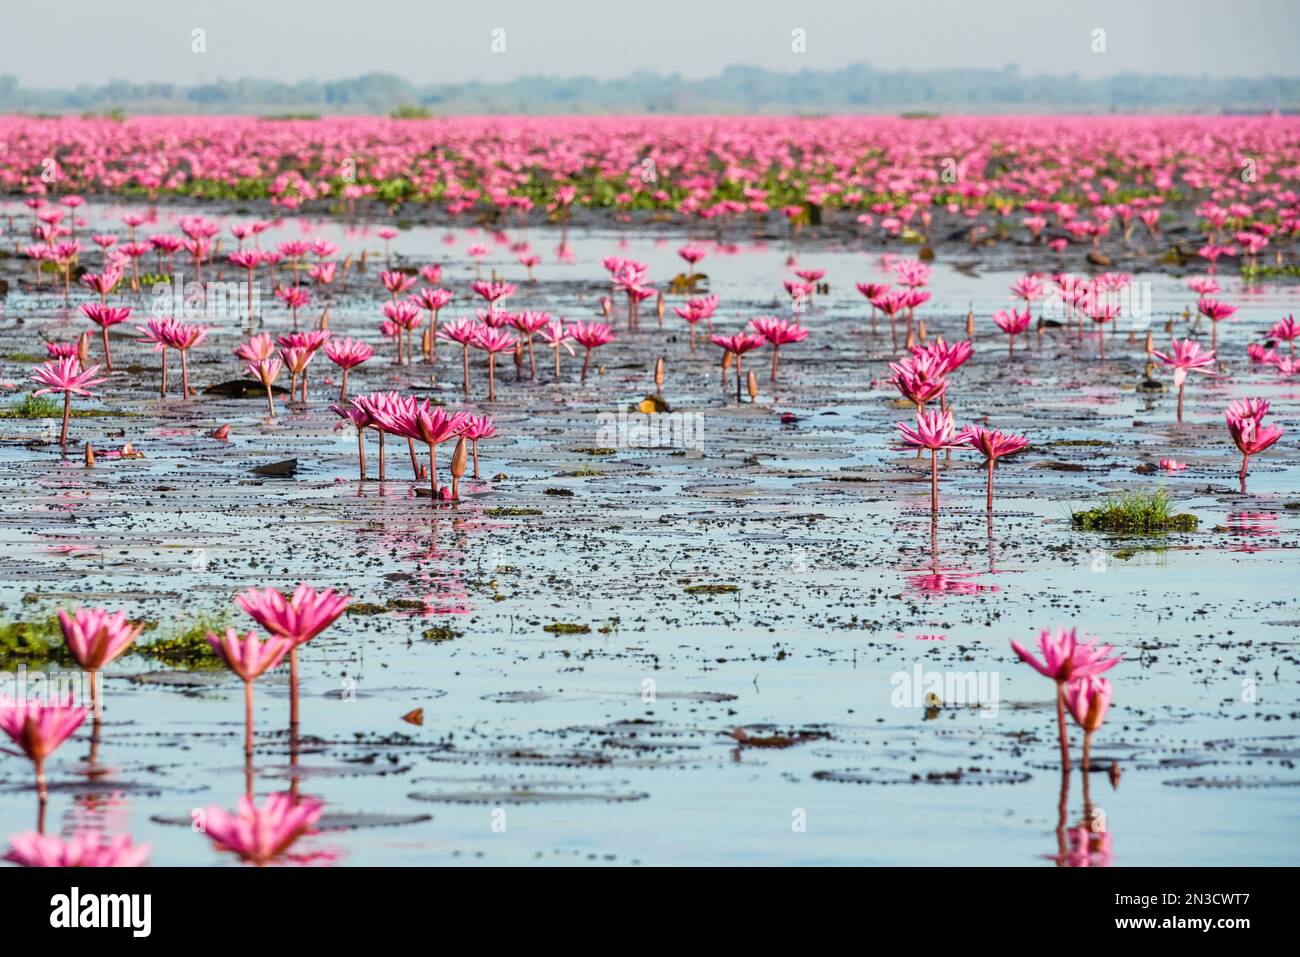 Pink water lilies (Nymphaeaceae) in full bloom; Pink Water Lilies Lake, Udon Thani, Thailand Stock Photo